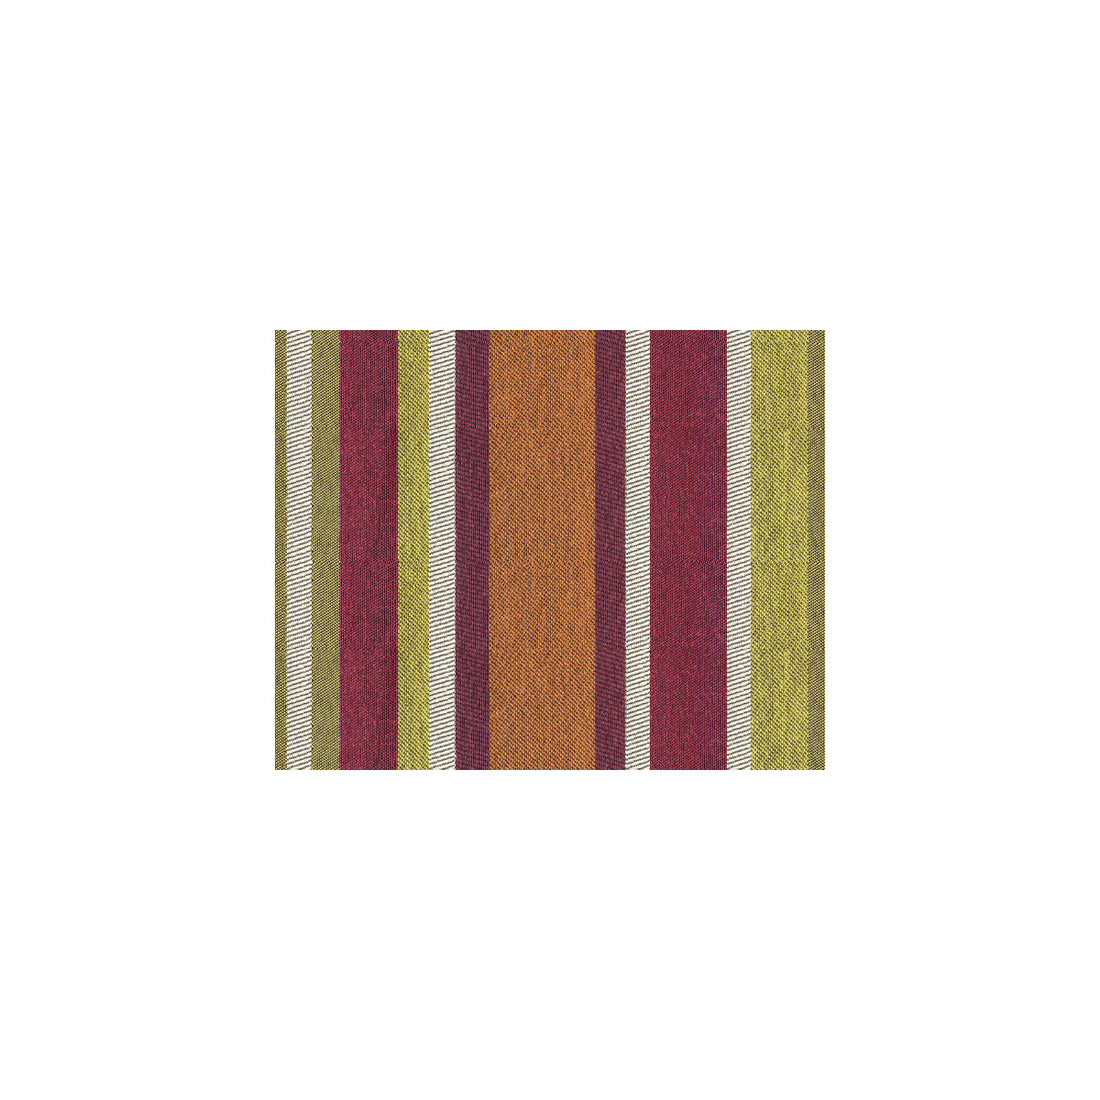 Roadline fabric in mulberry color - pattern 31543.310.0 - by Kravet Contract in the Contract Gis collection